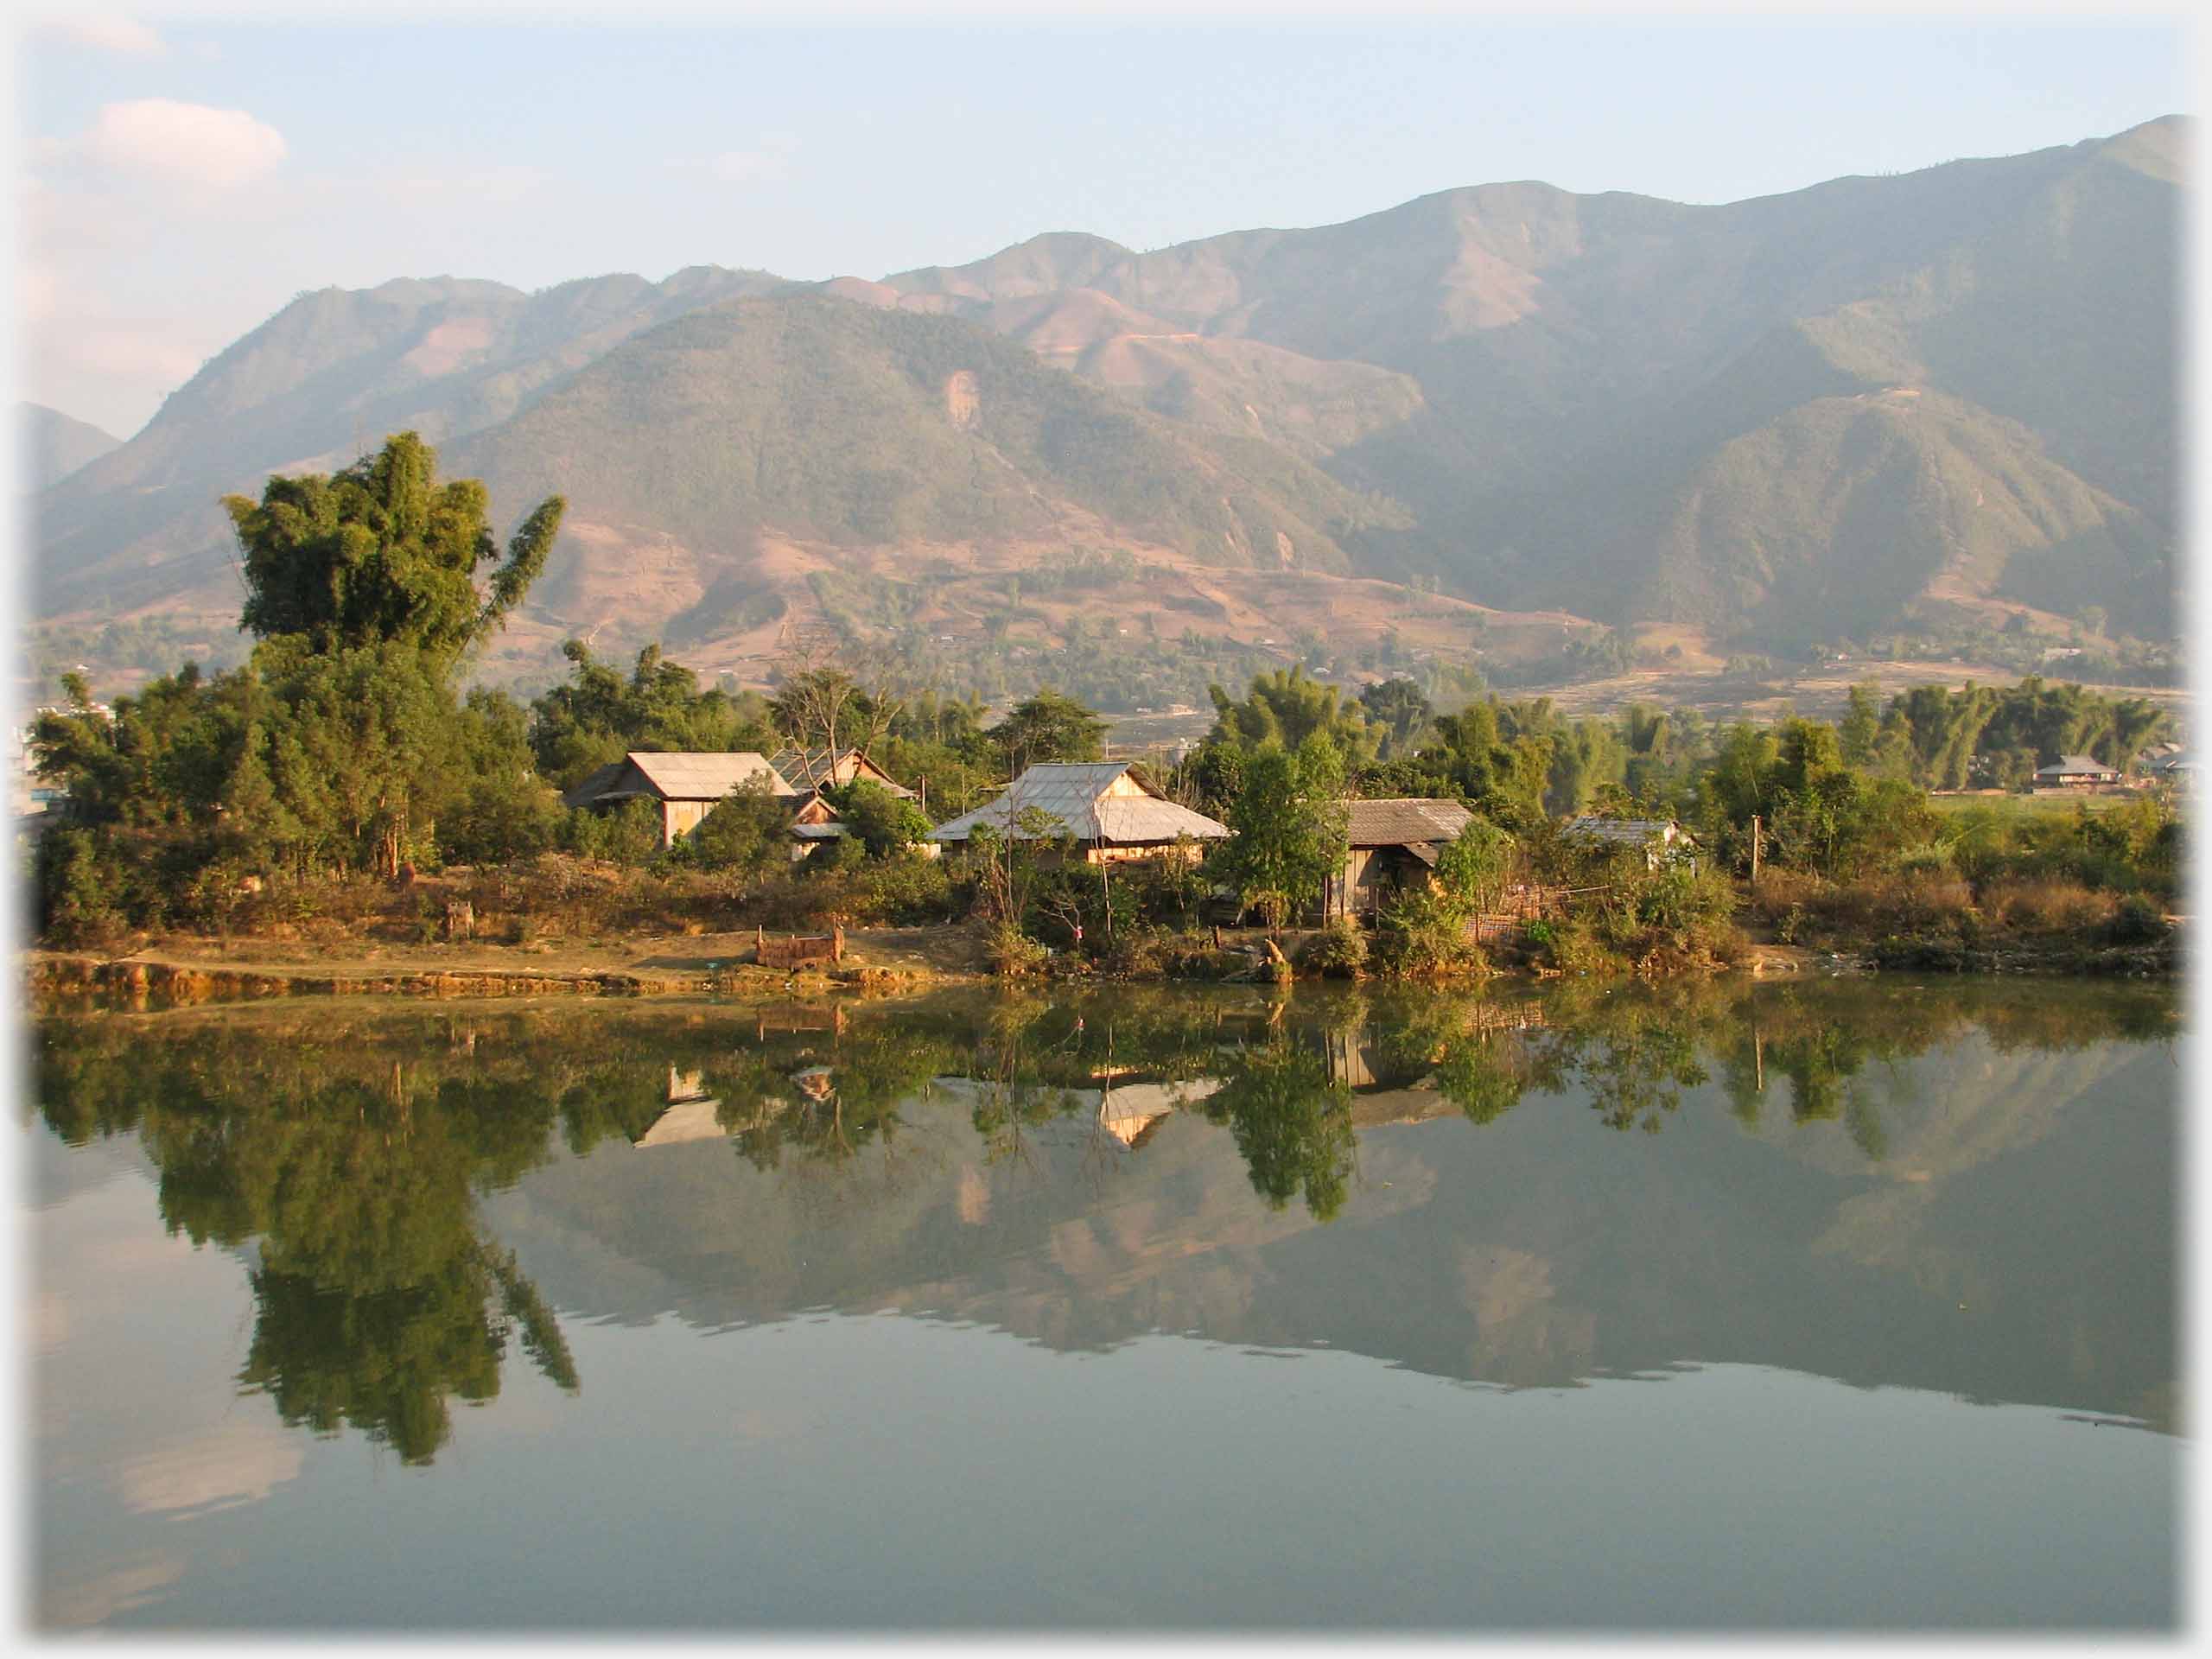 Houses clustered by river with bamboos and mountains beyond.